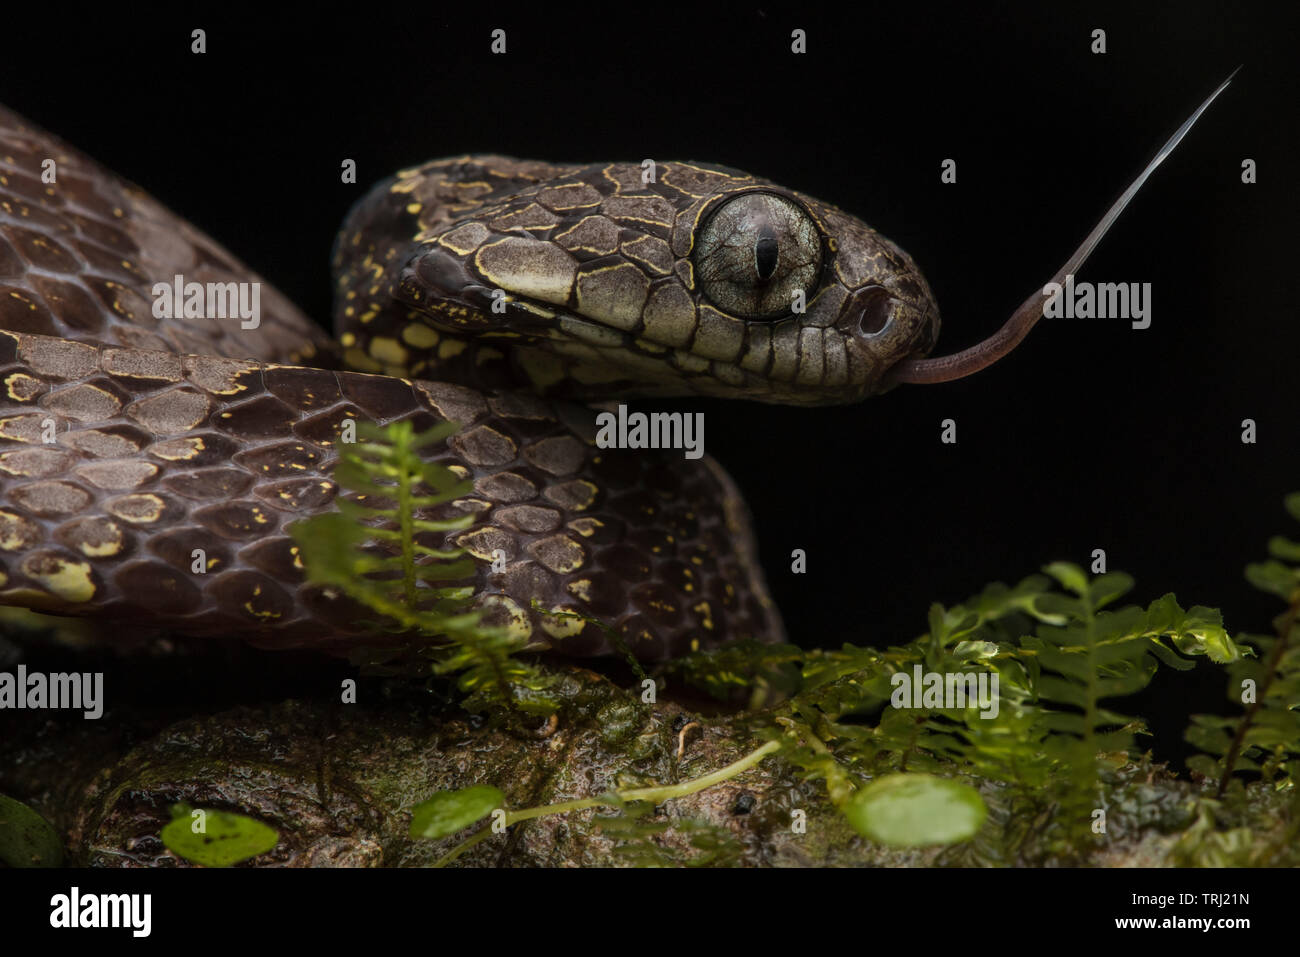 A neotropical snail eater (Dipsas indica) from Yasuni national park, these snakes feed exclusively on snails and slugs. Stock Photo